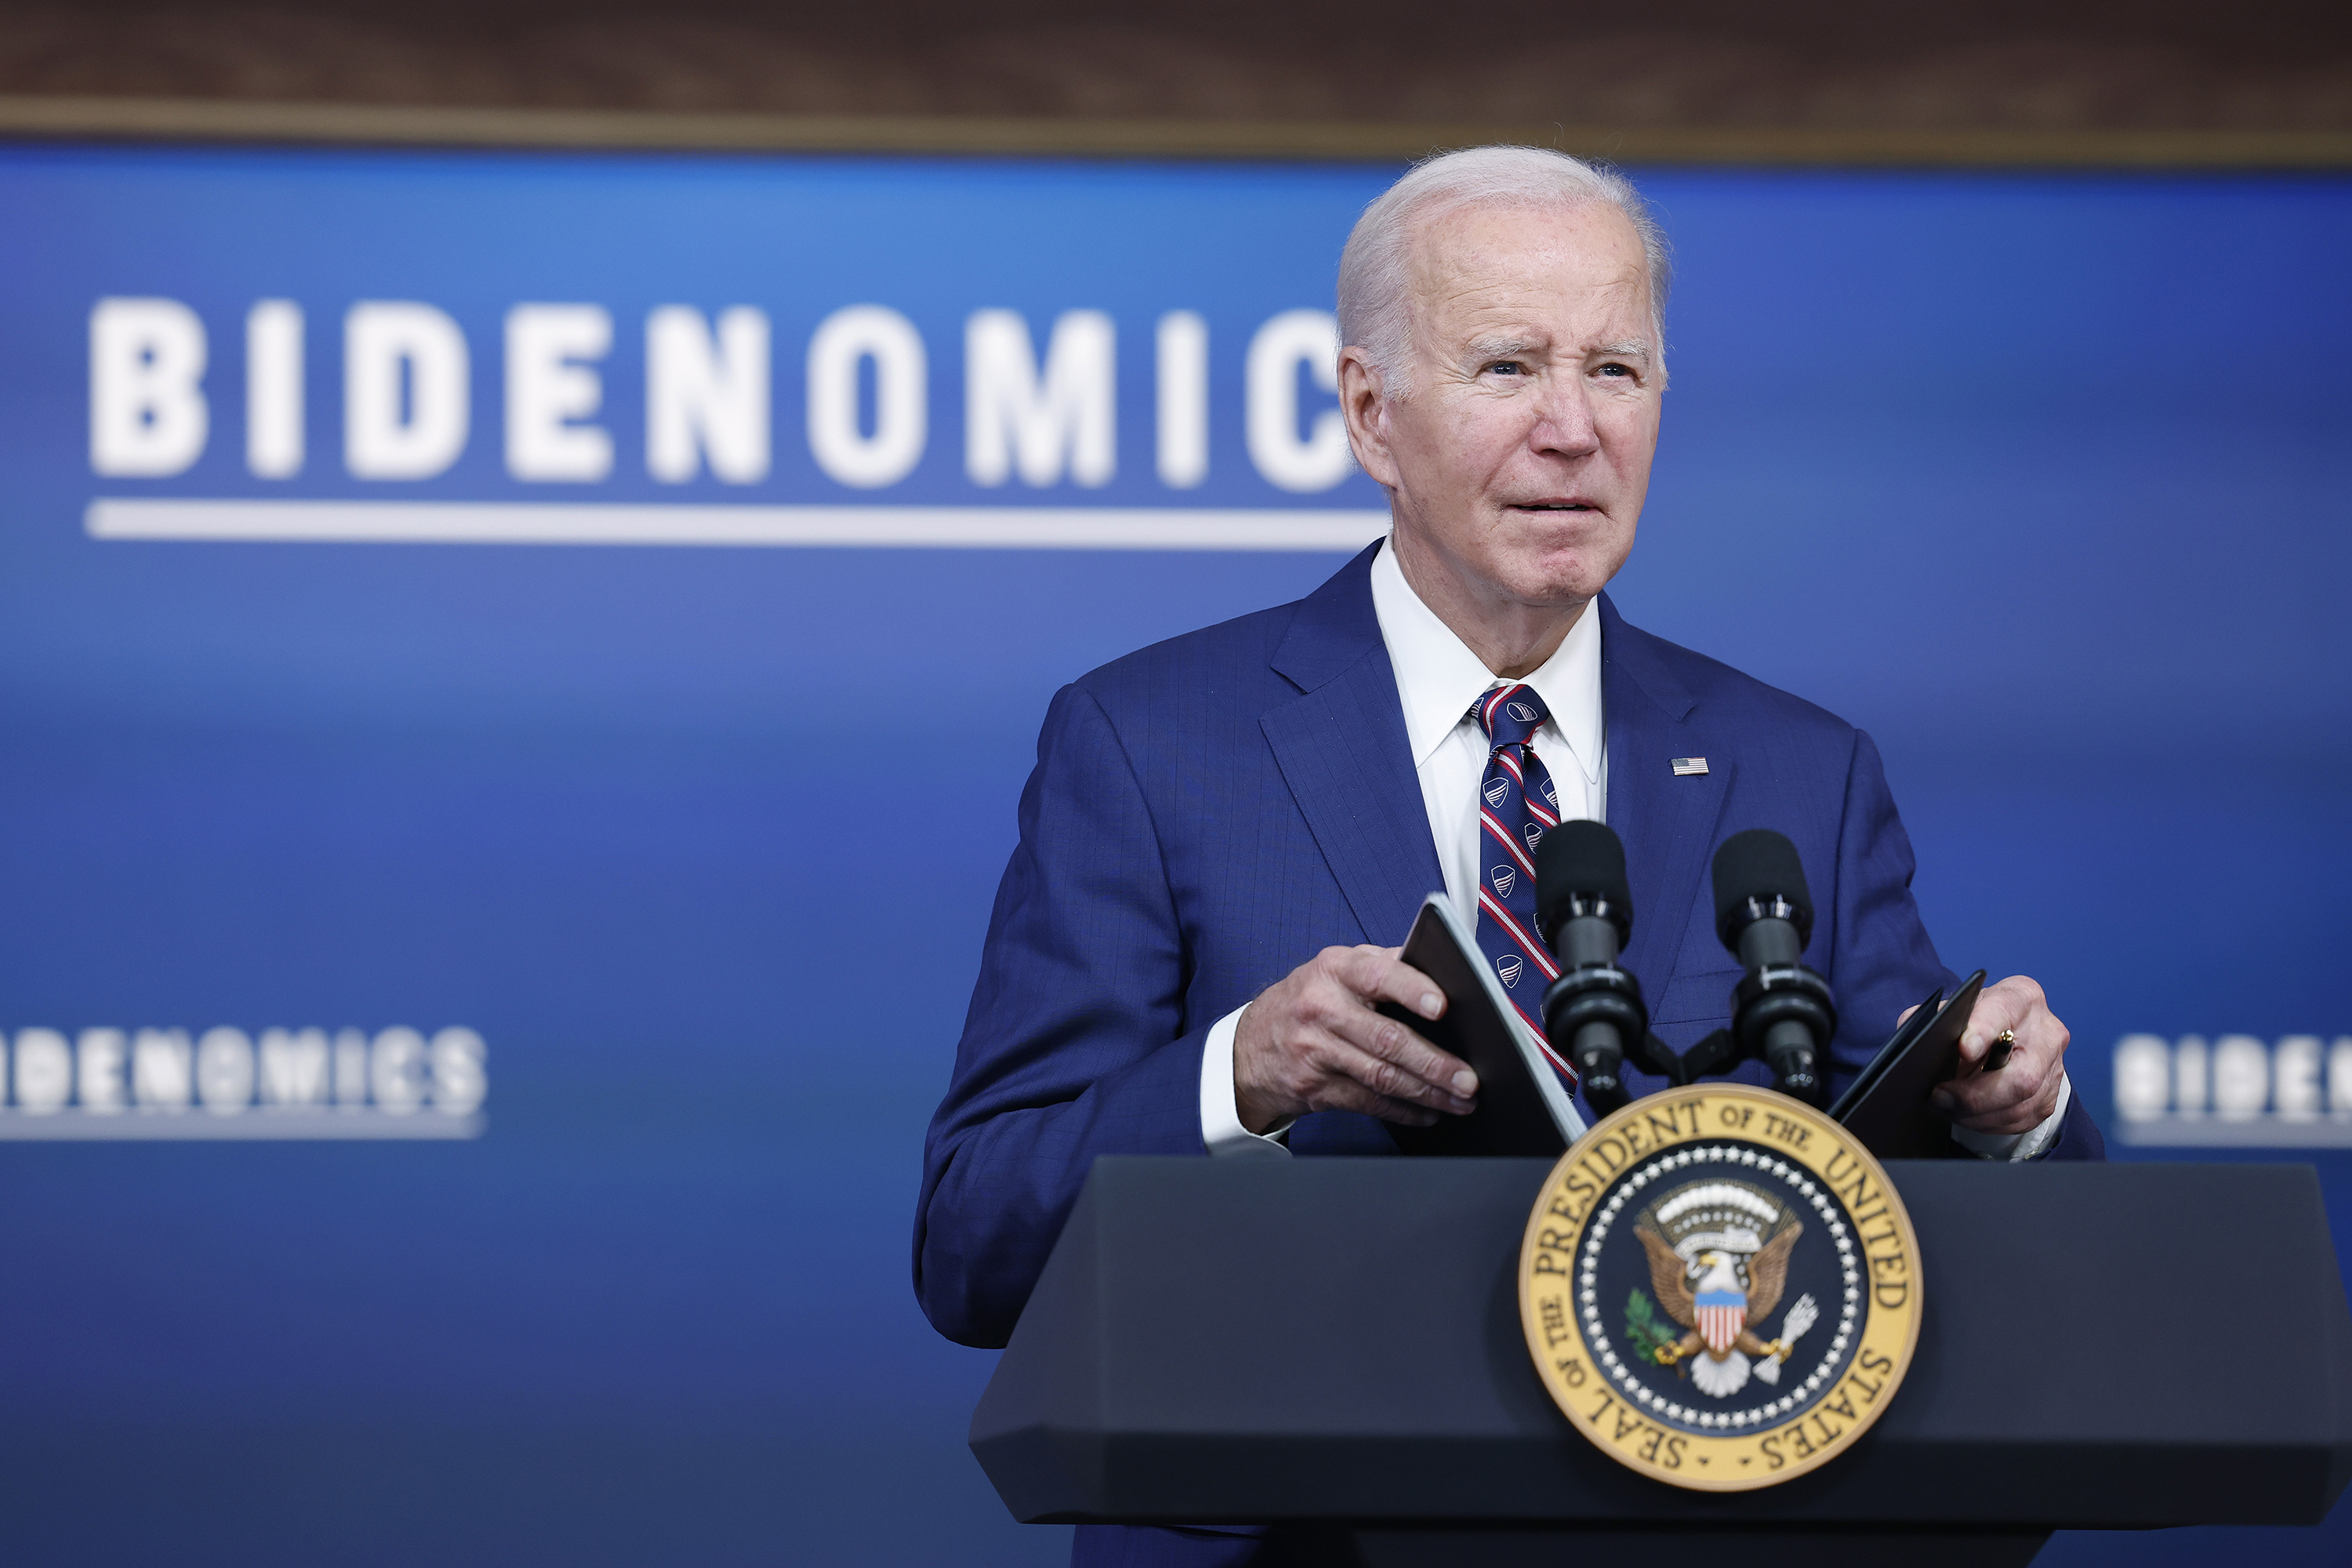 US President Joe Biden speaks during an event at the White House on October 23, in Washington, DC.